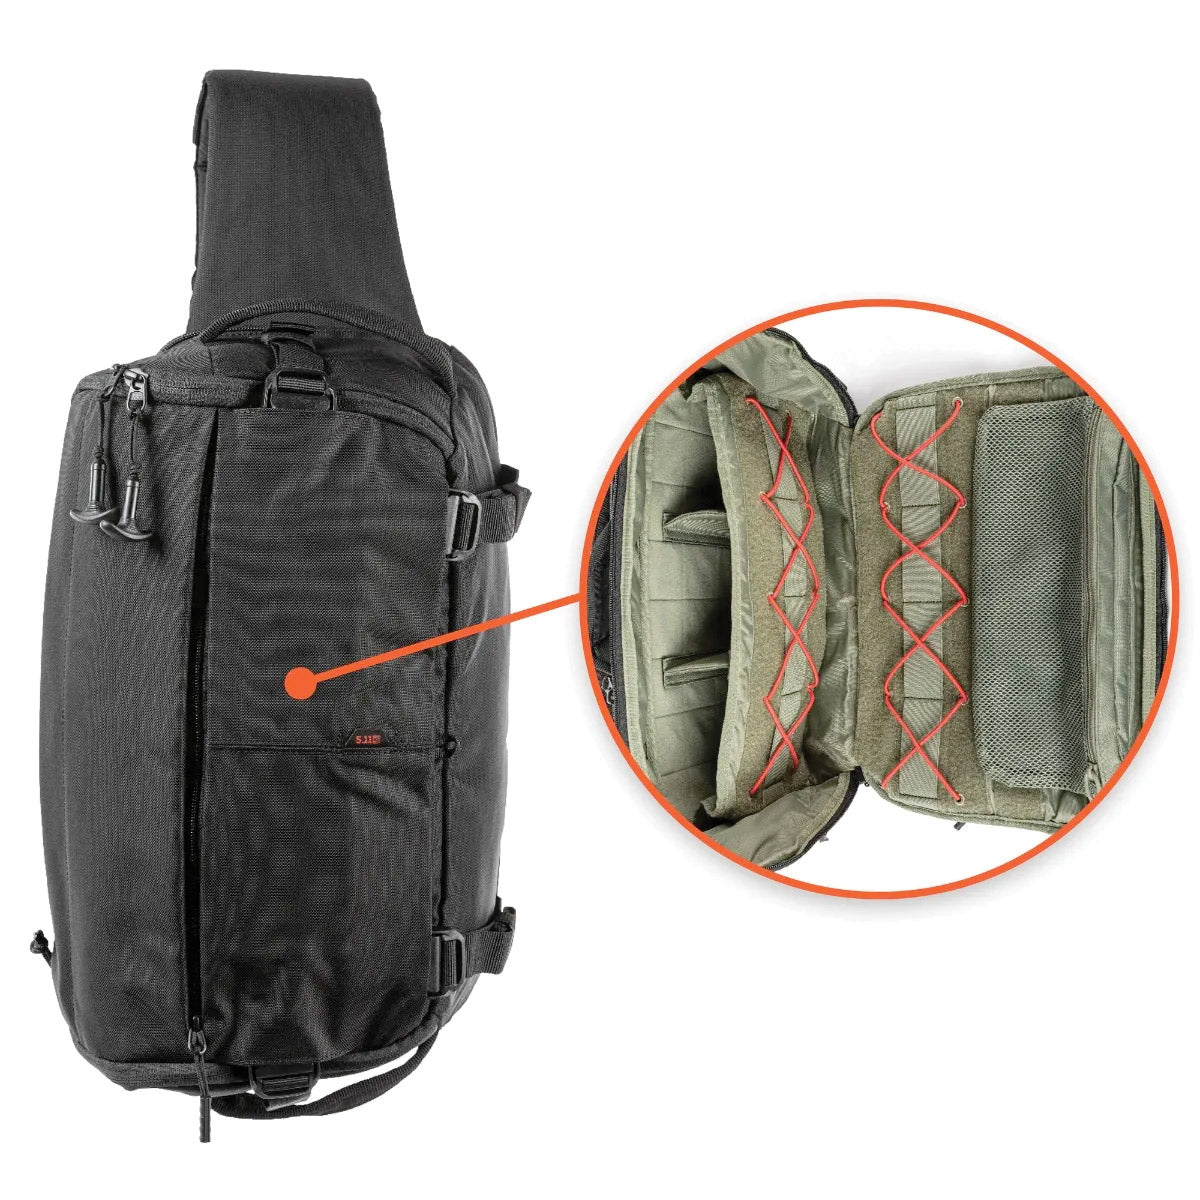 5.11 Tactical LV10 Utility/Med Sling Pack 13L Bags, Packs and Cases 5.11 Tactical Tactical Gear Supplier Tactical Distributors Australia